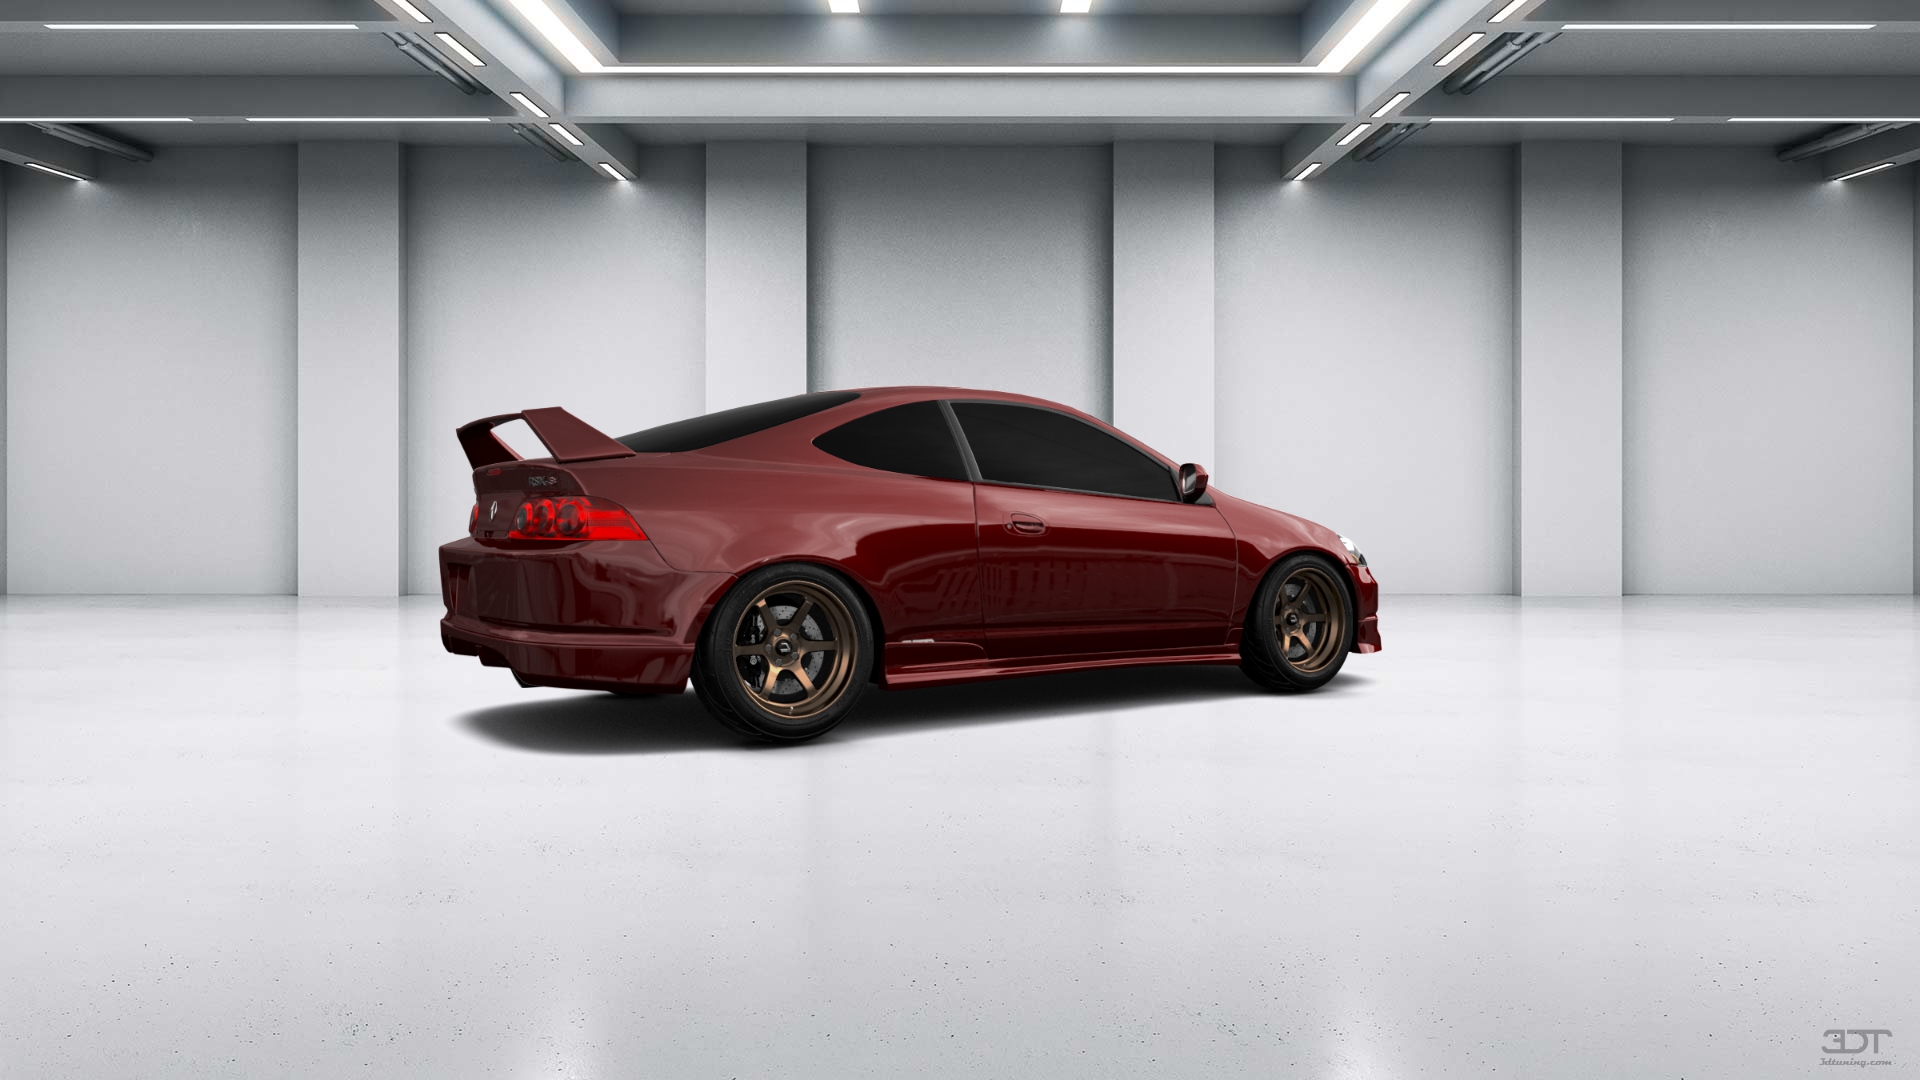 Acura RSX-S 3 Door Coupe 2006 tuning